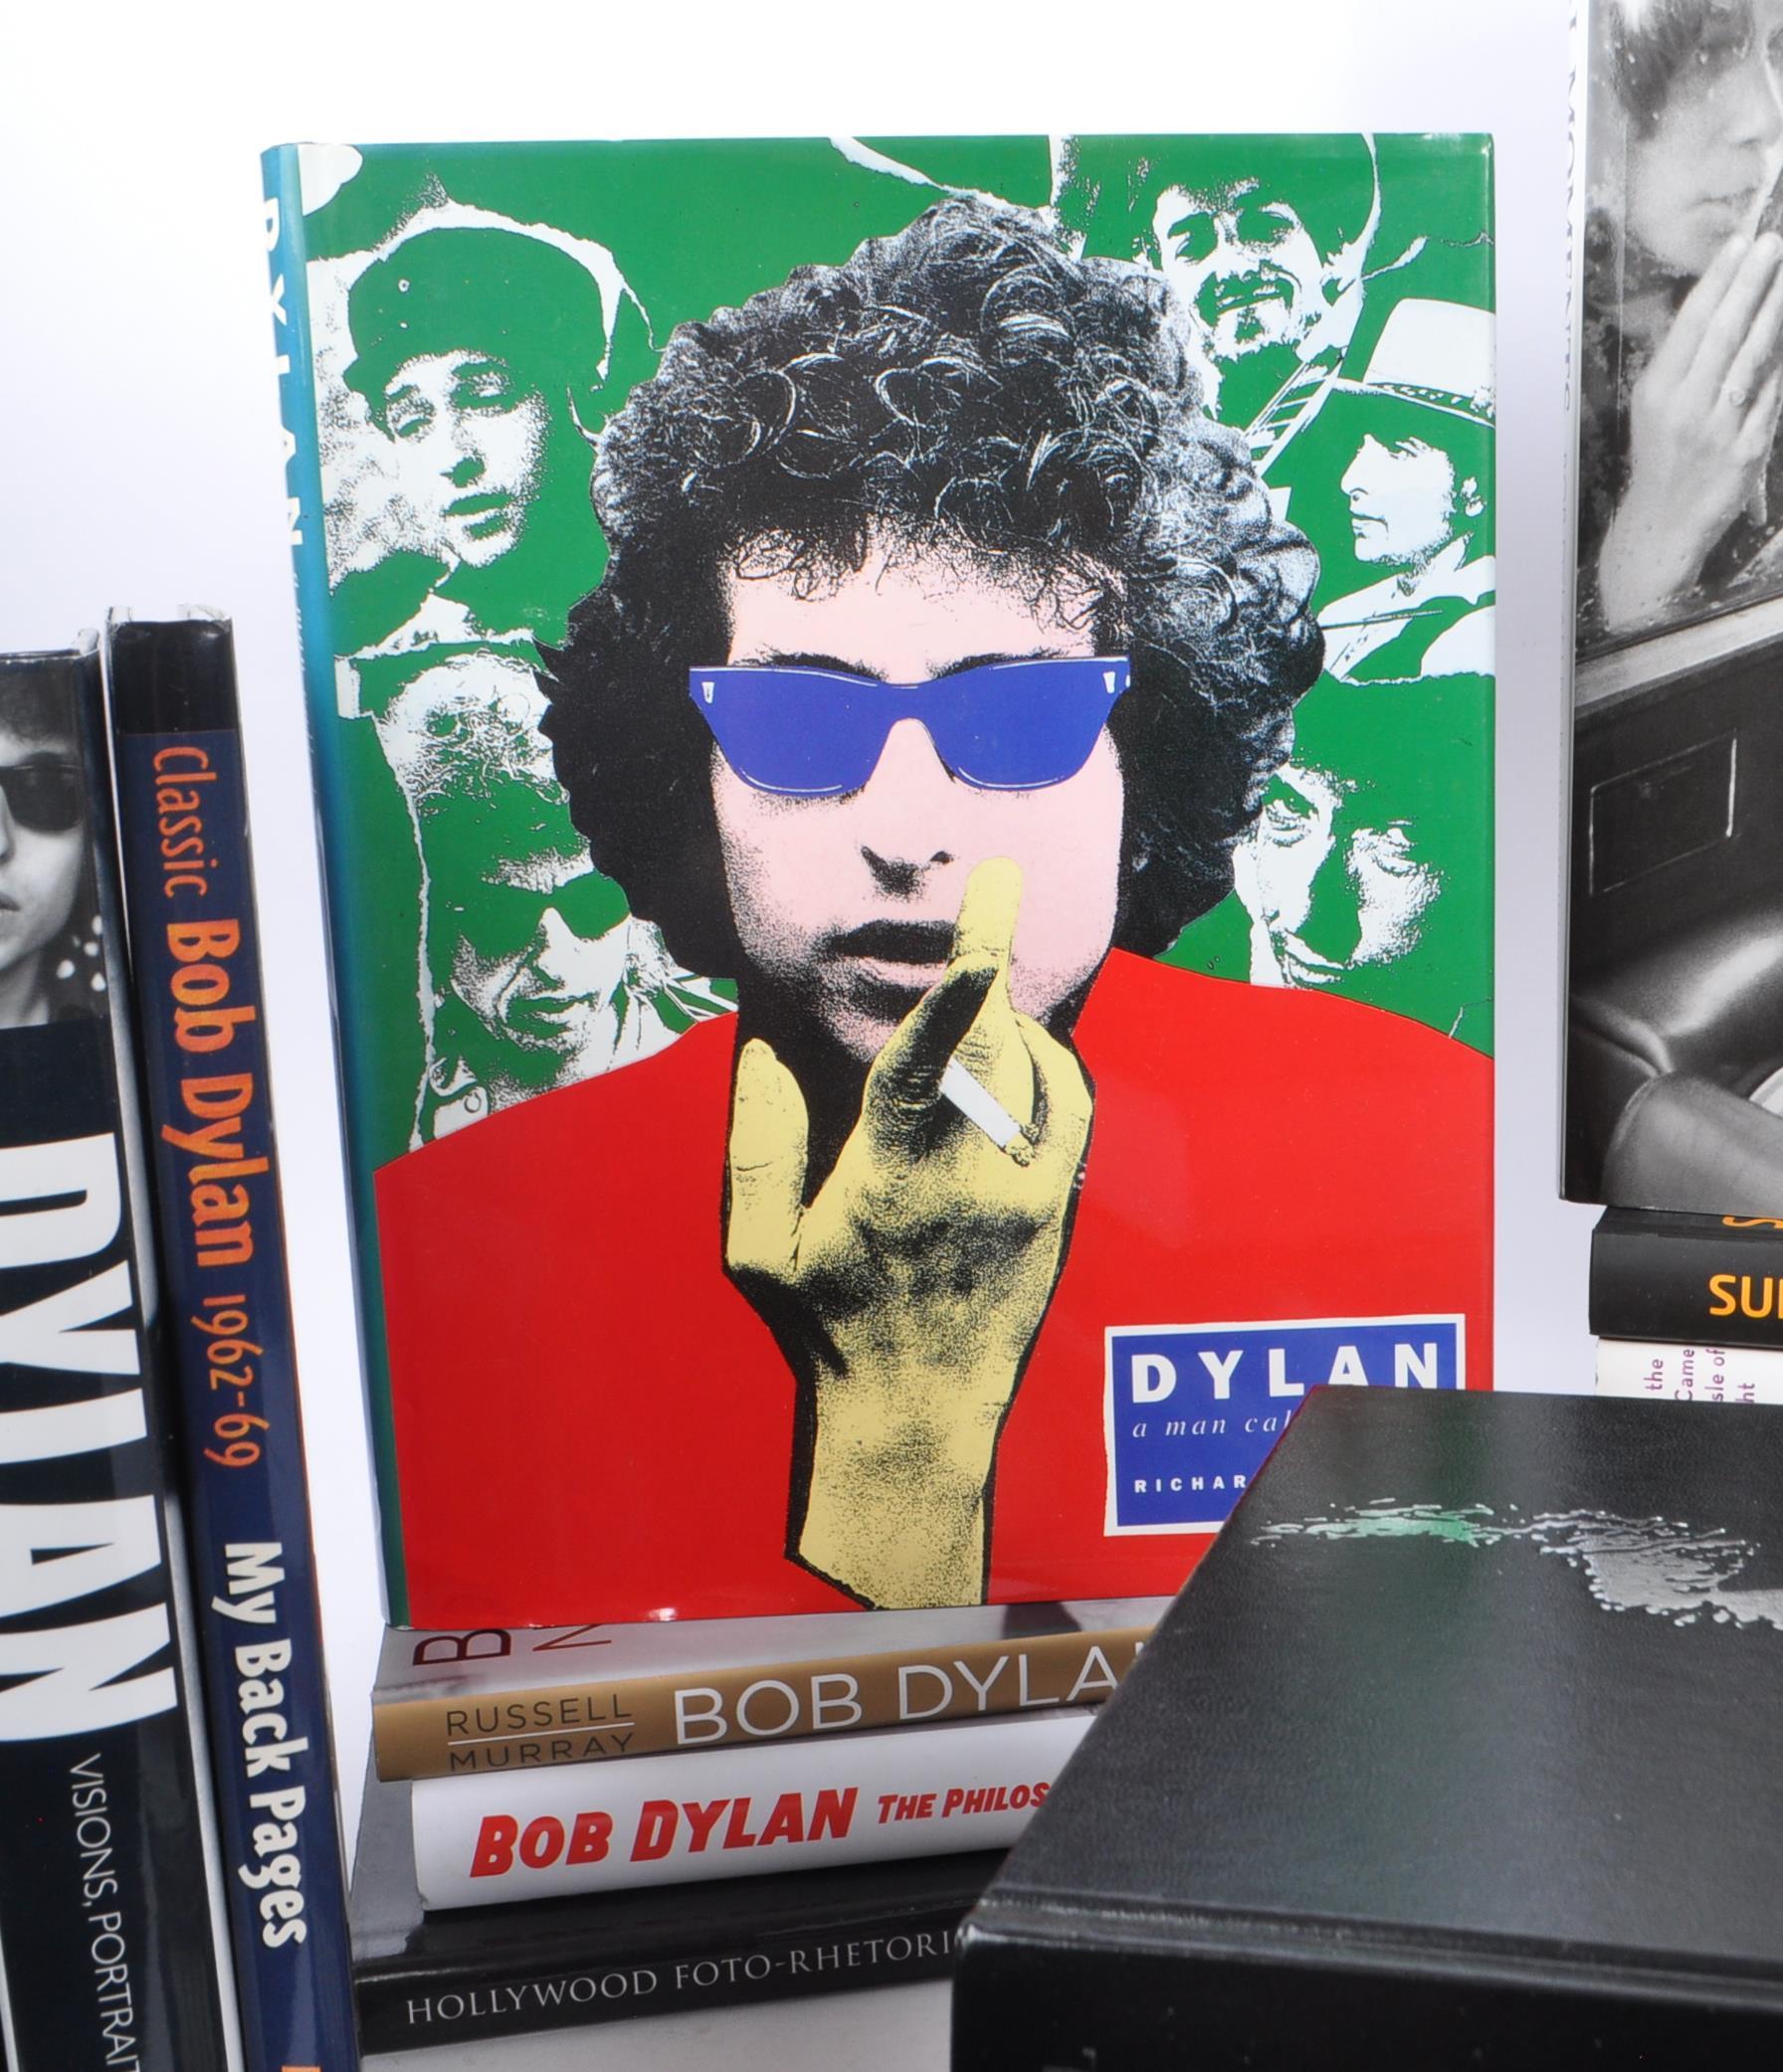 BOB DYLAN - COLLECTION OF MUSIC REFERENCE BOOK - Image 3 of 10